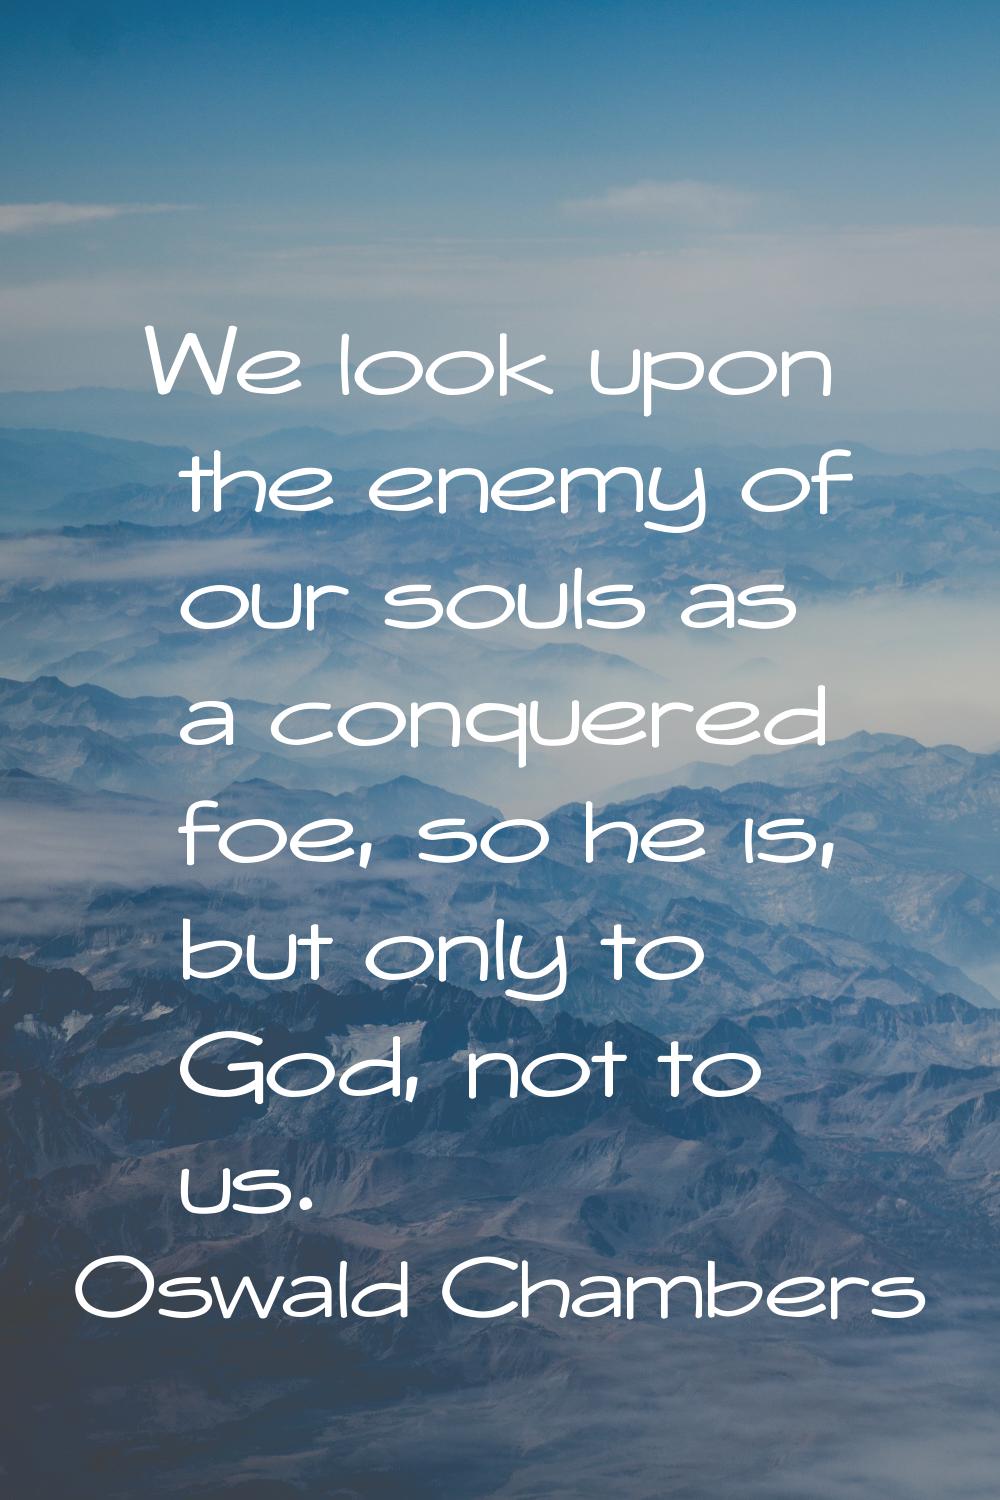 We look upon the enemy of our souls as a conquered foe, so he is, but only to God, not to us.